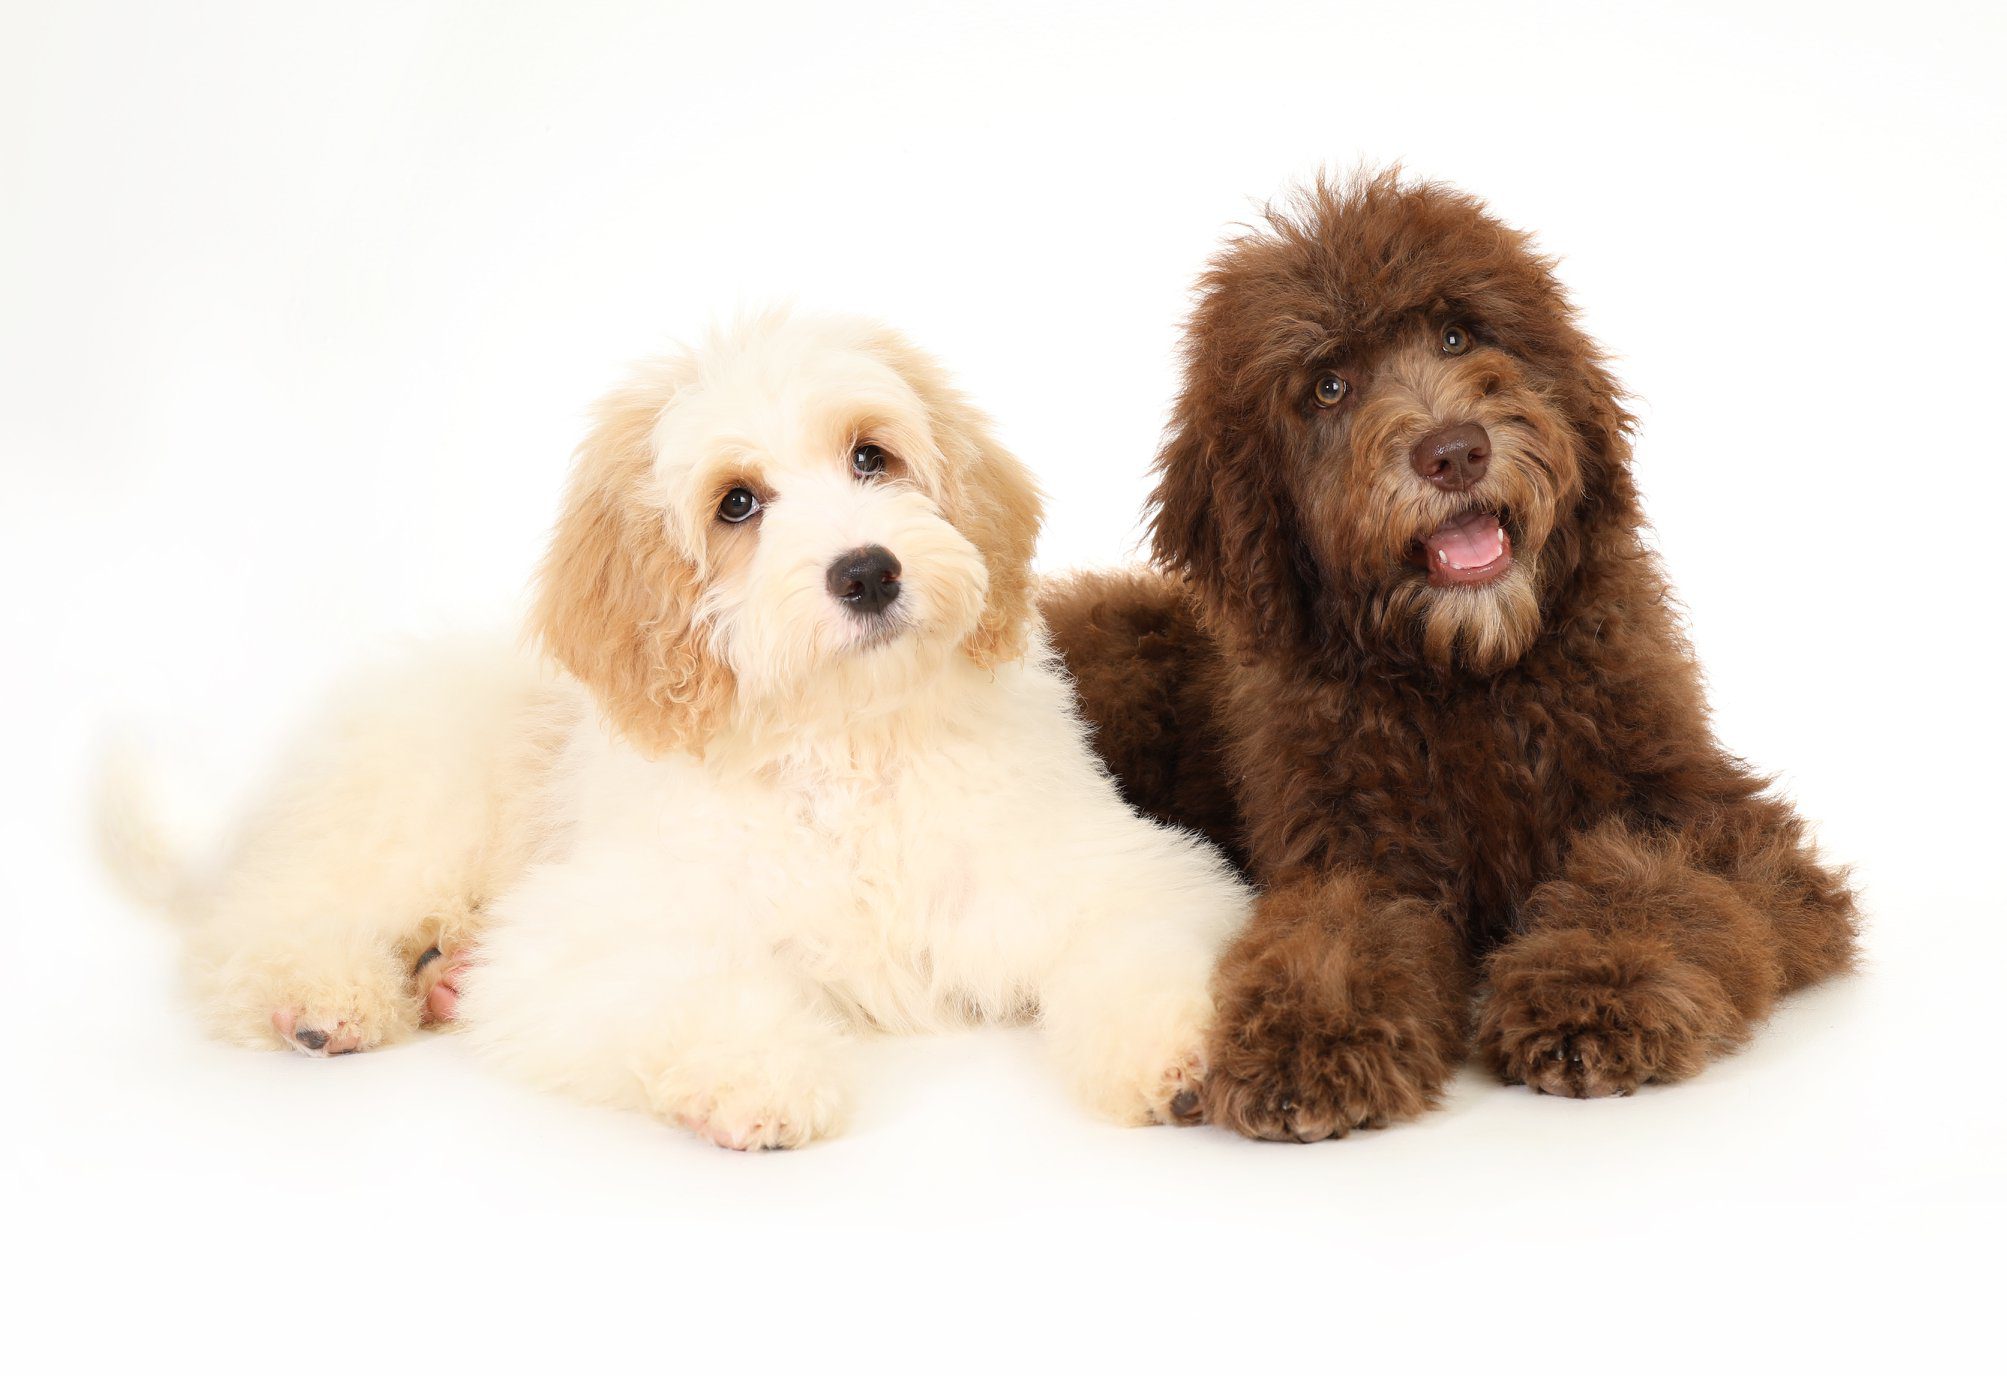 an example of a light apricot goldendoodle and an example of a brown goldendoodle